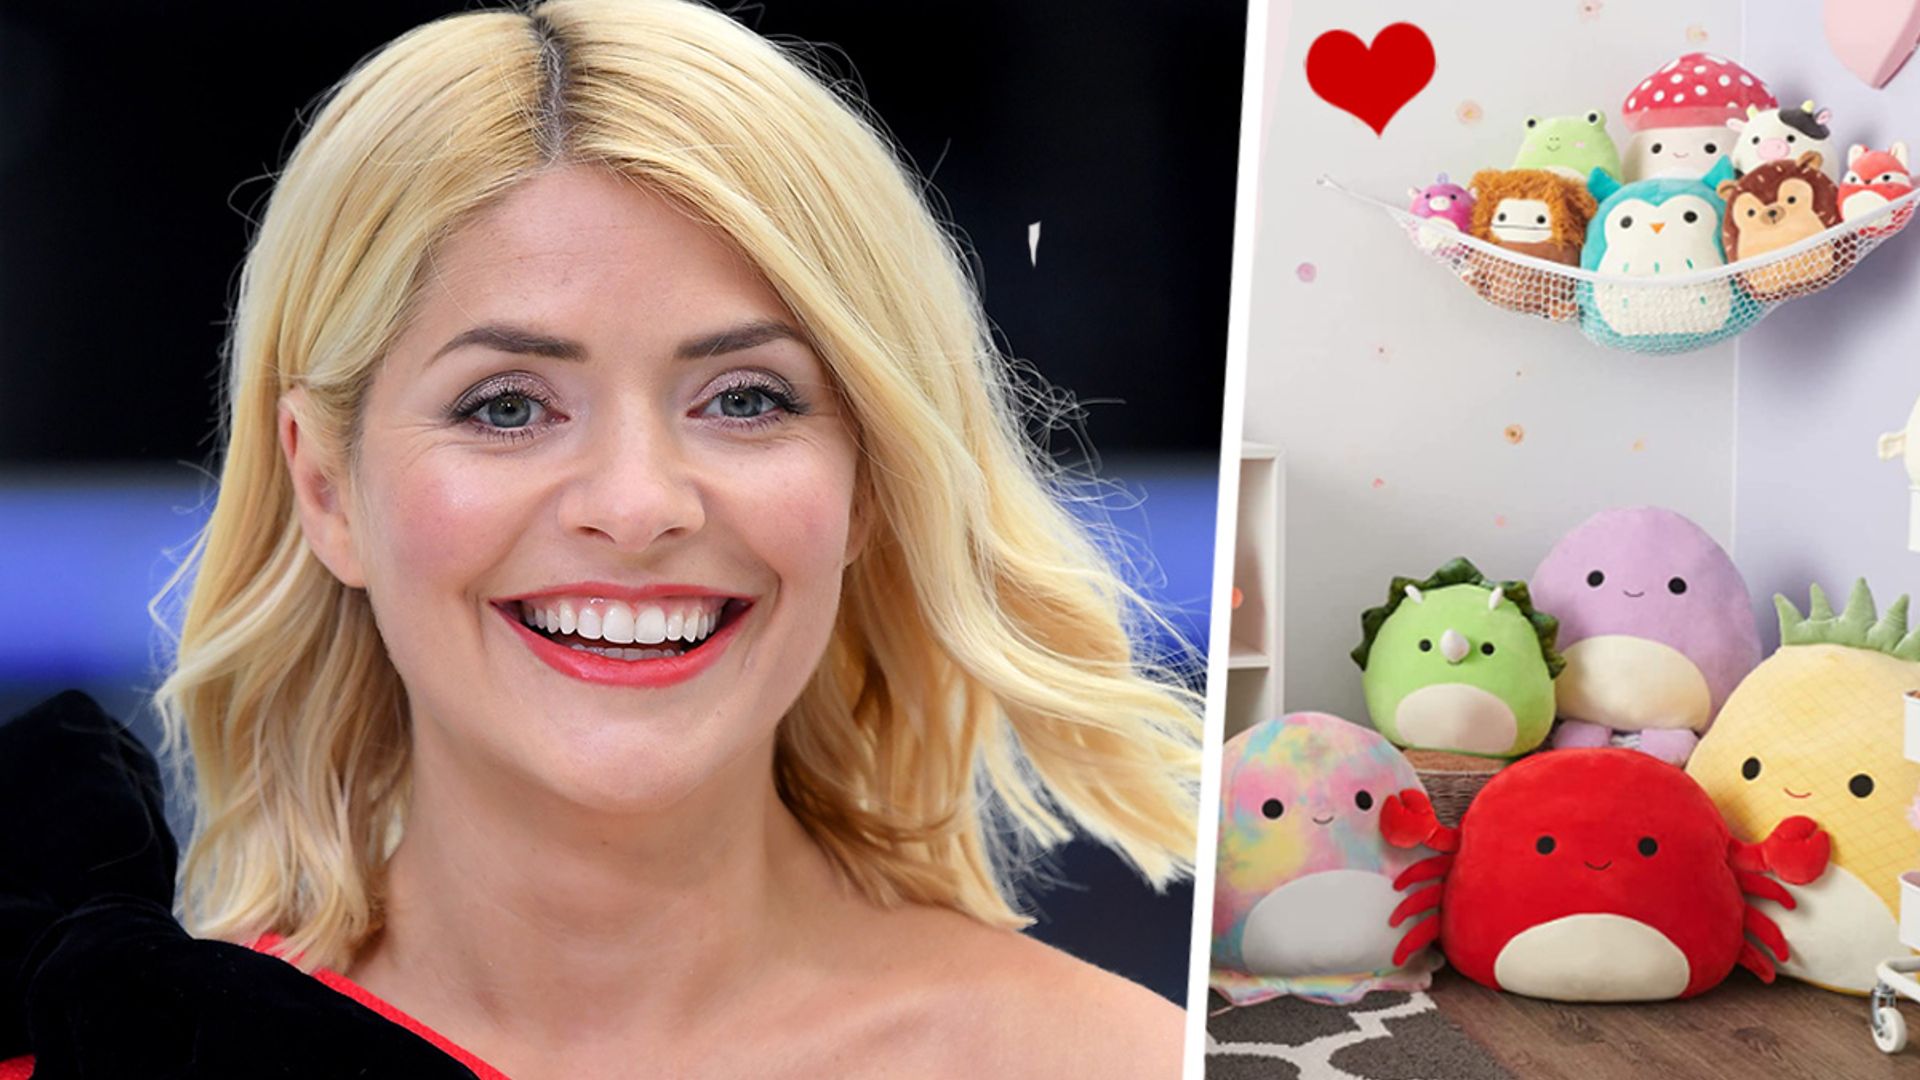 Holly Willoughby's daughter is a big fan of Squishmallow toys - and they're a hit on social media